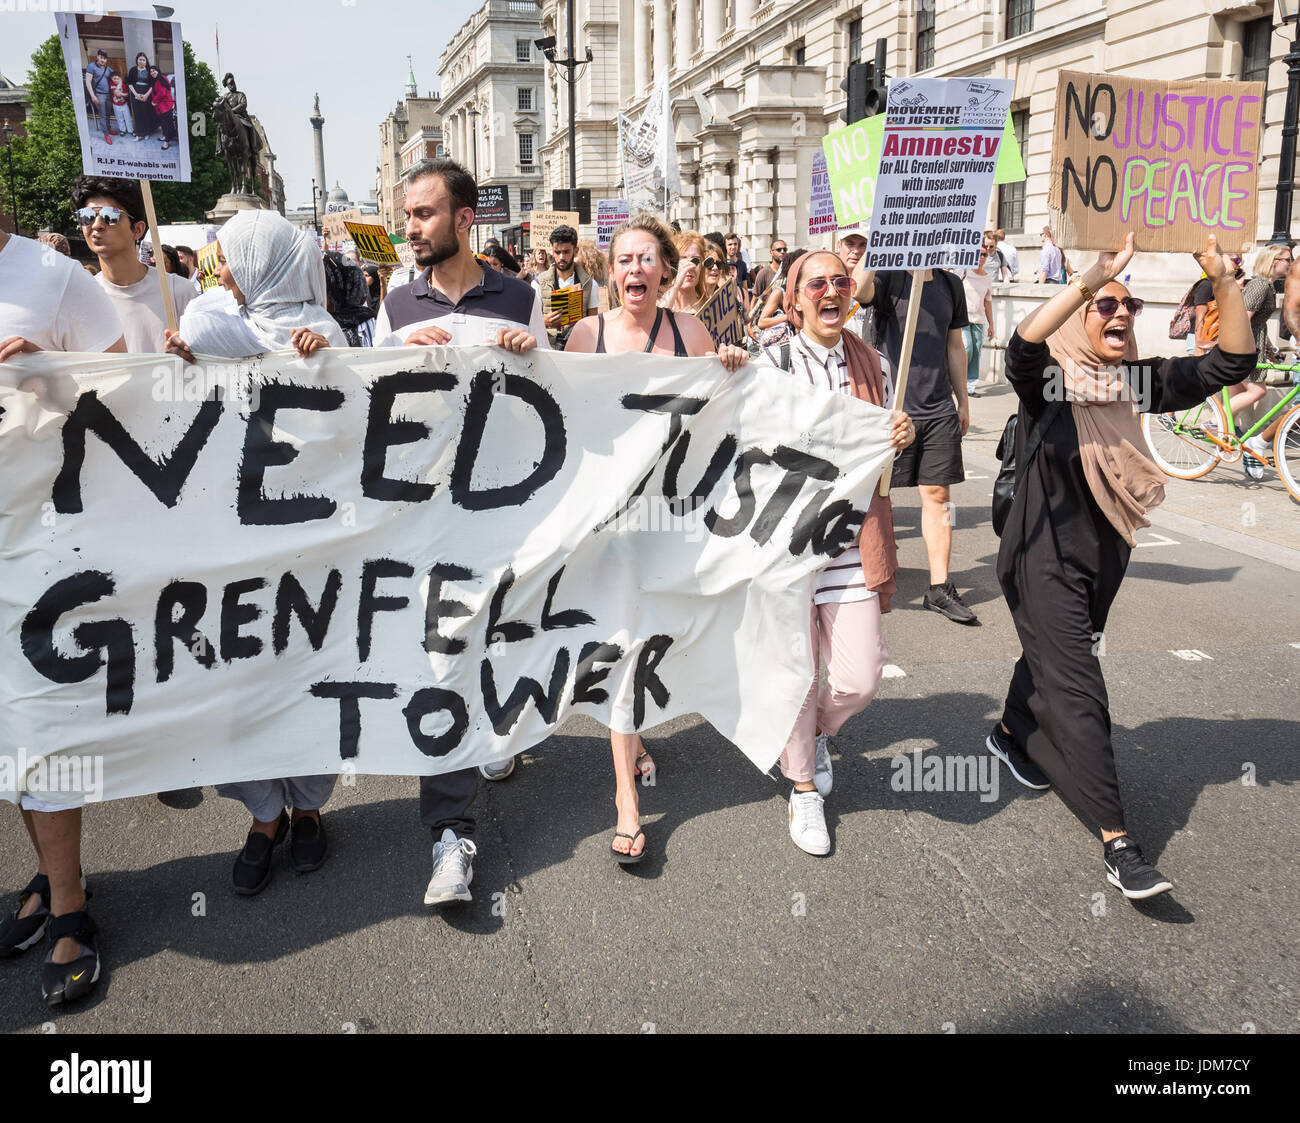 London, UK. 21st June, 2017. “Day of Rage” march and protest in Westminster after the Queen's Speech. Many were demanding Justice for the victims of the Grenfell Tower fire disaster whilst others voiced support for Jeremy Corbyn and the Labour party. © Guy Corbishley/Alamy Live News Stock Photo